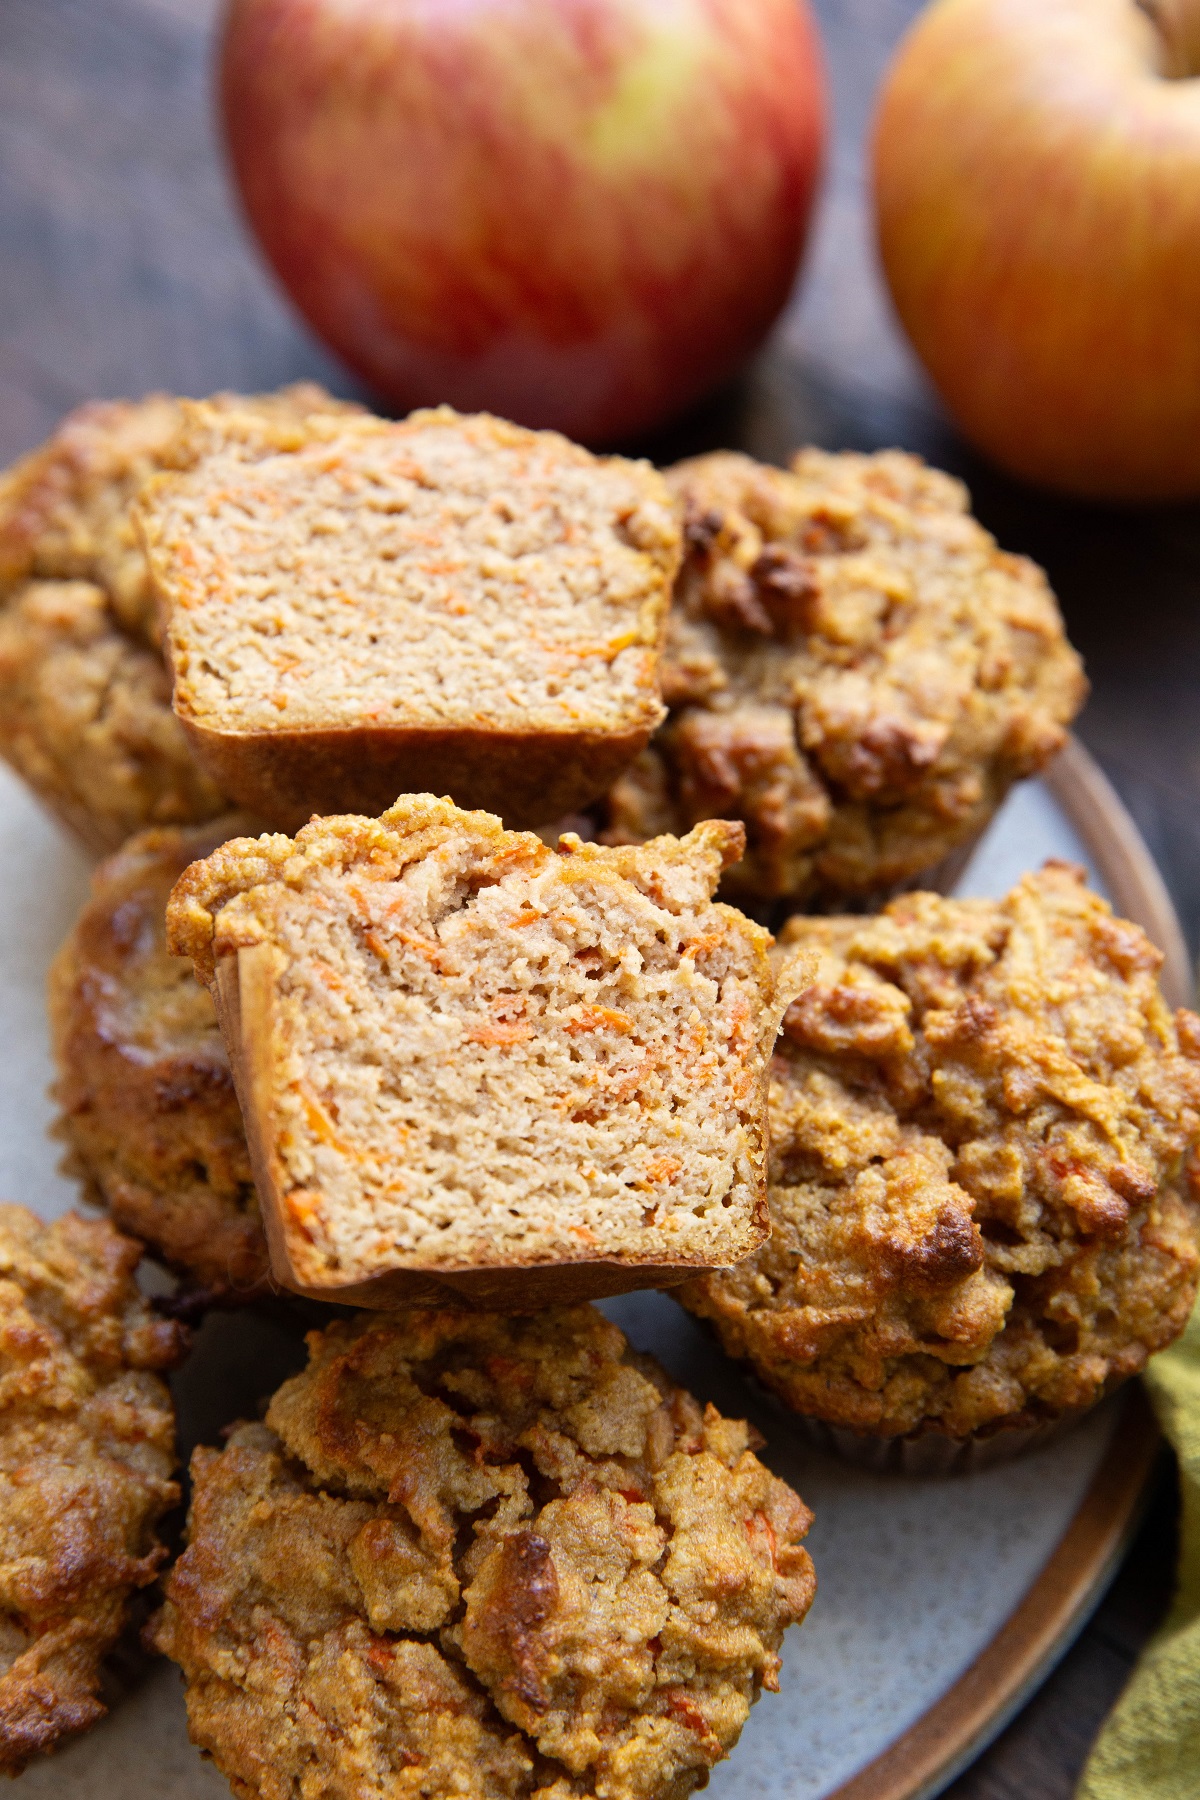 Plate of apple carrot muffins with one sliced in half so you can see the moist inside.